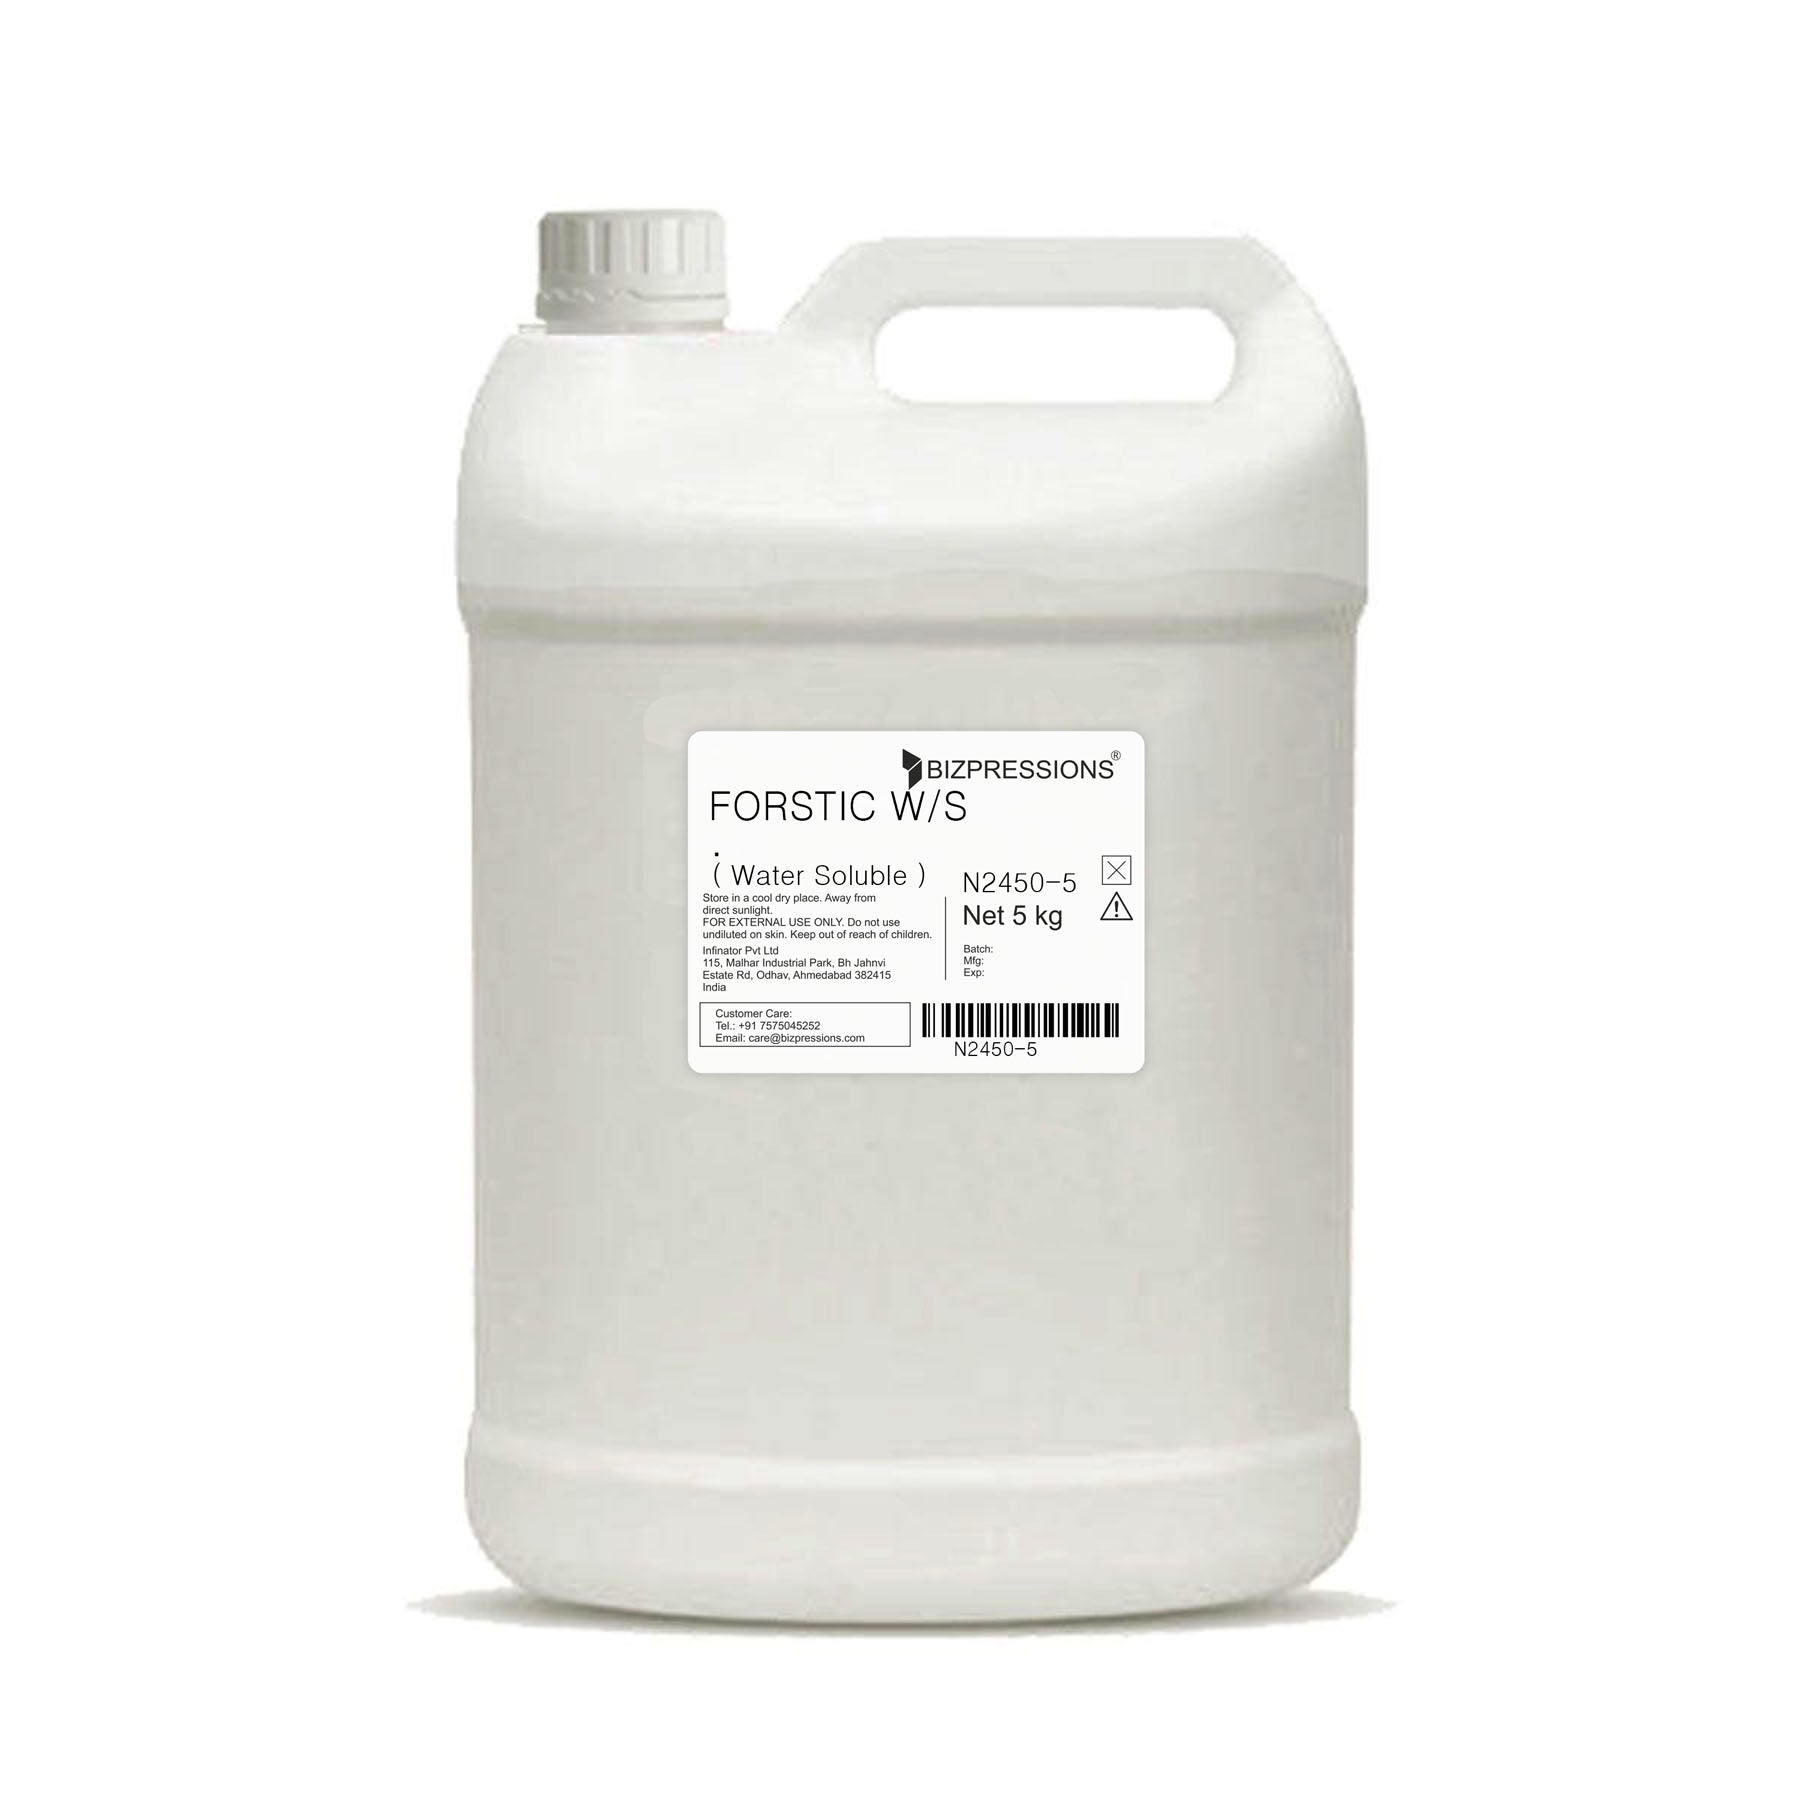 FORSTIC W/S - Fragrance ( Water Soluble ) - 5 kg